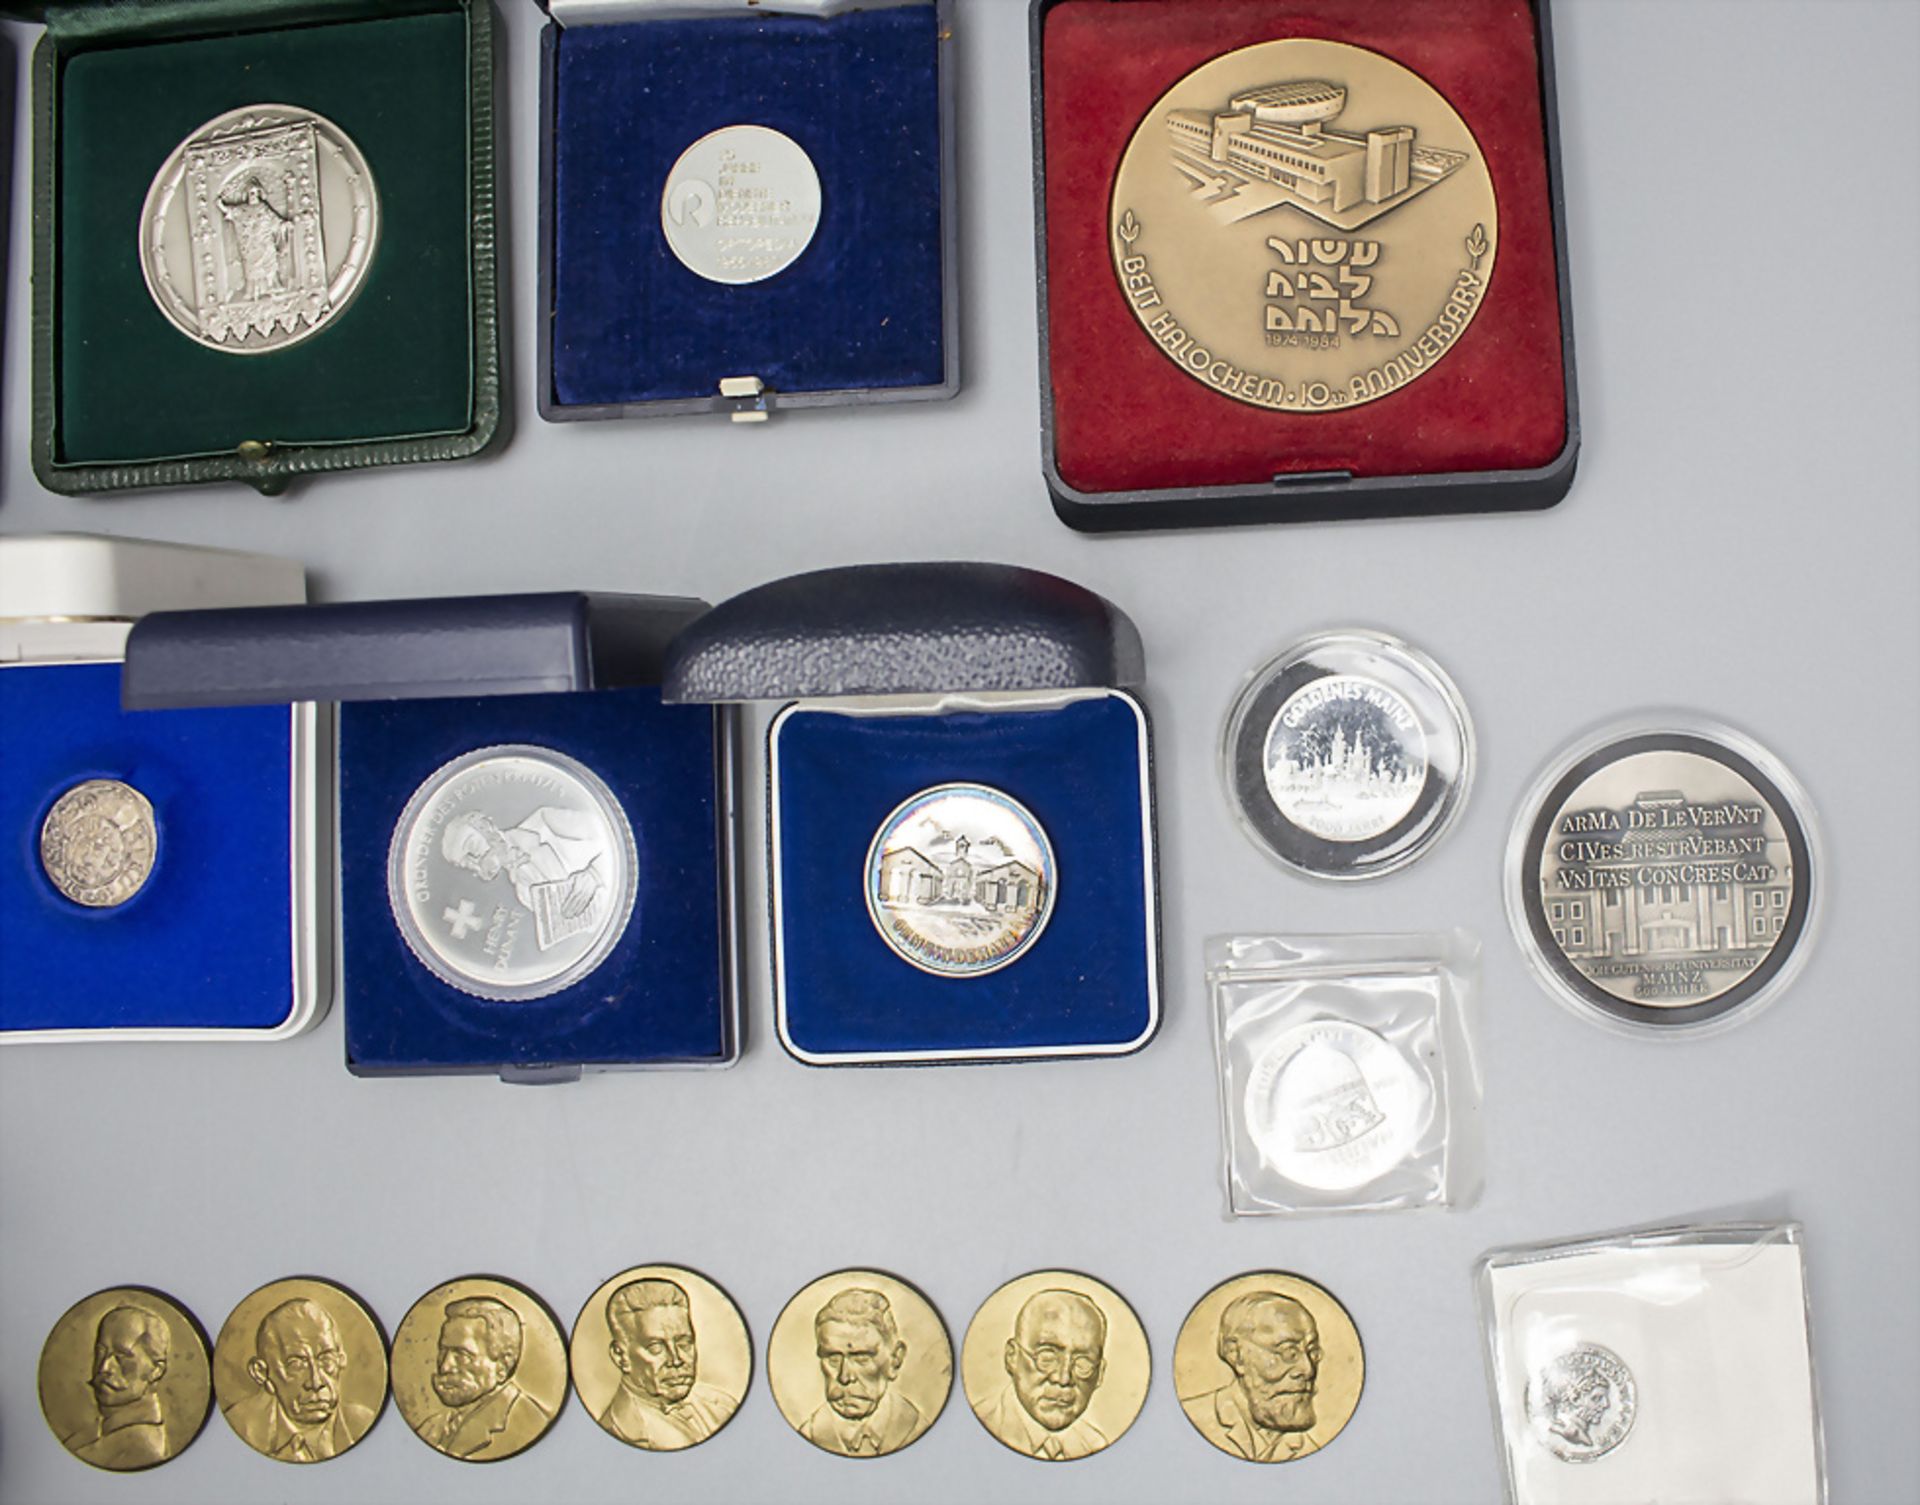 Sammlung Medaillen / A collection of medals - Image 5 of 5